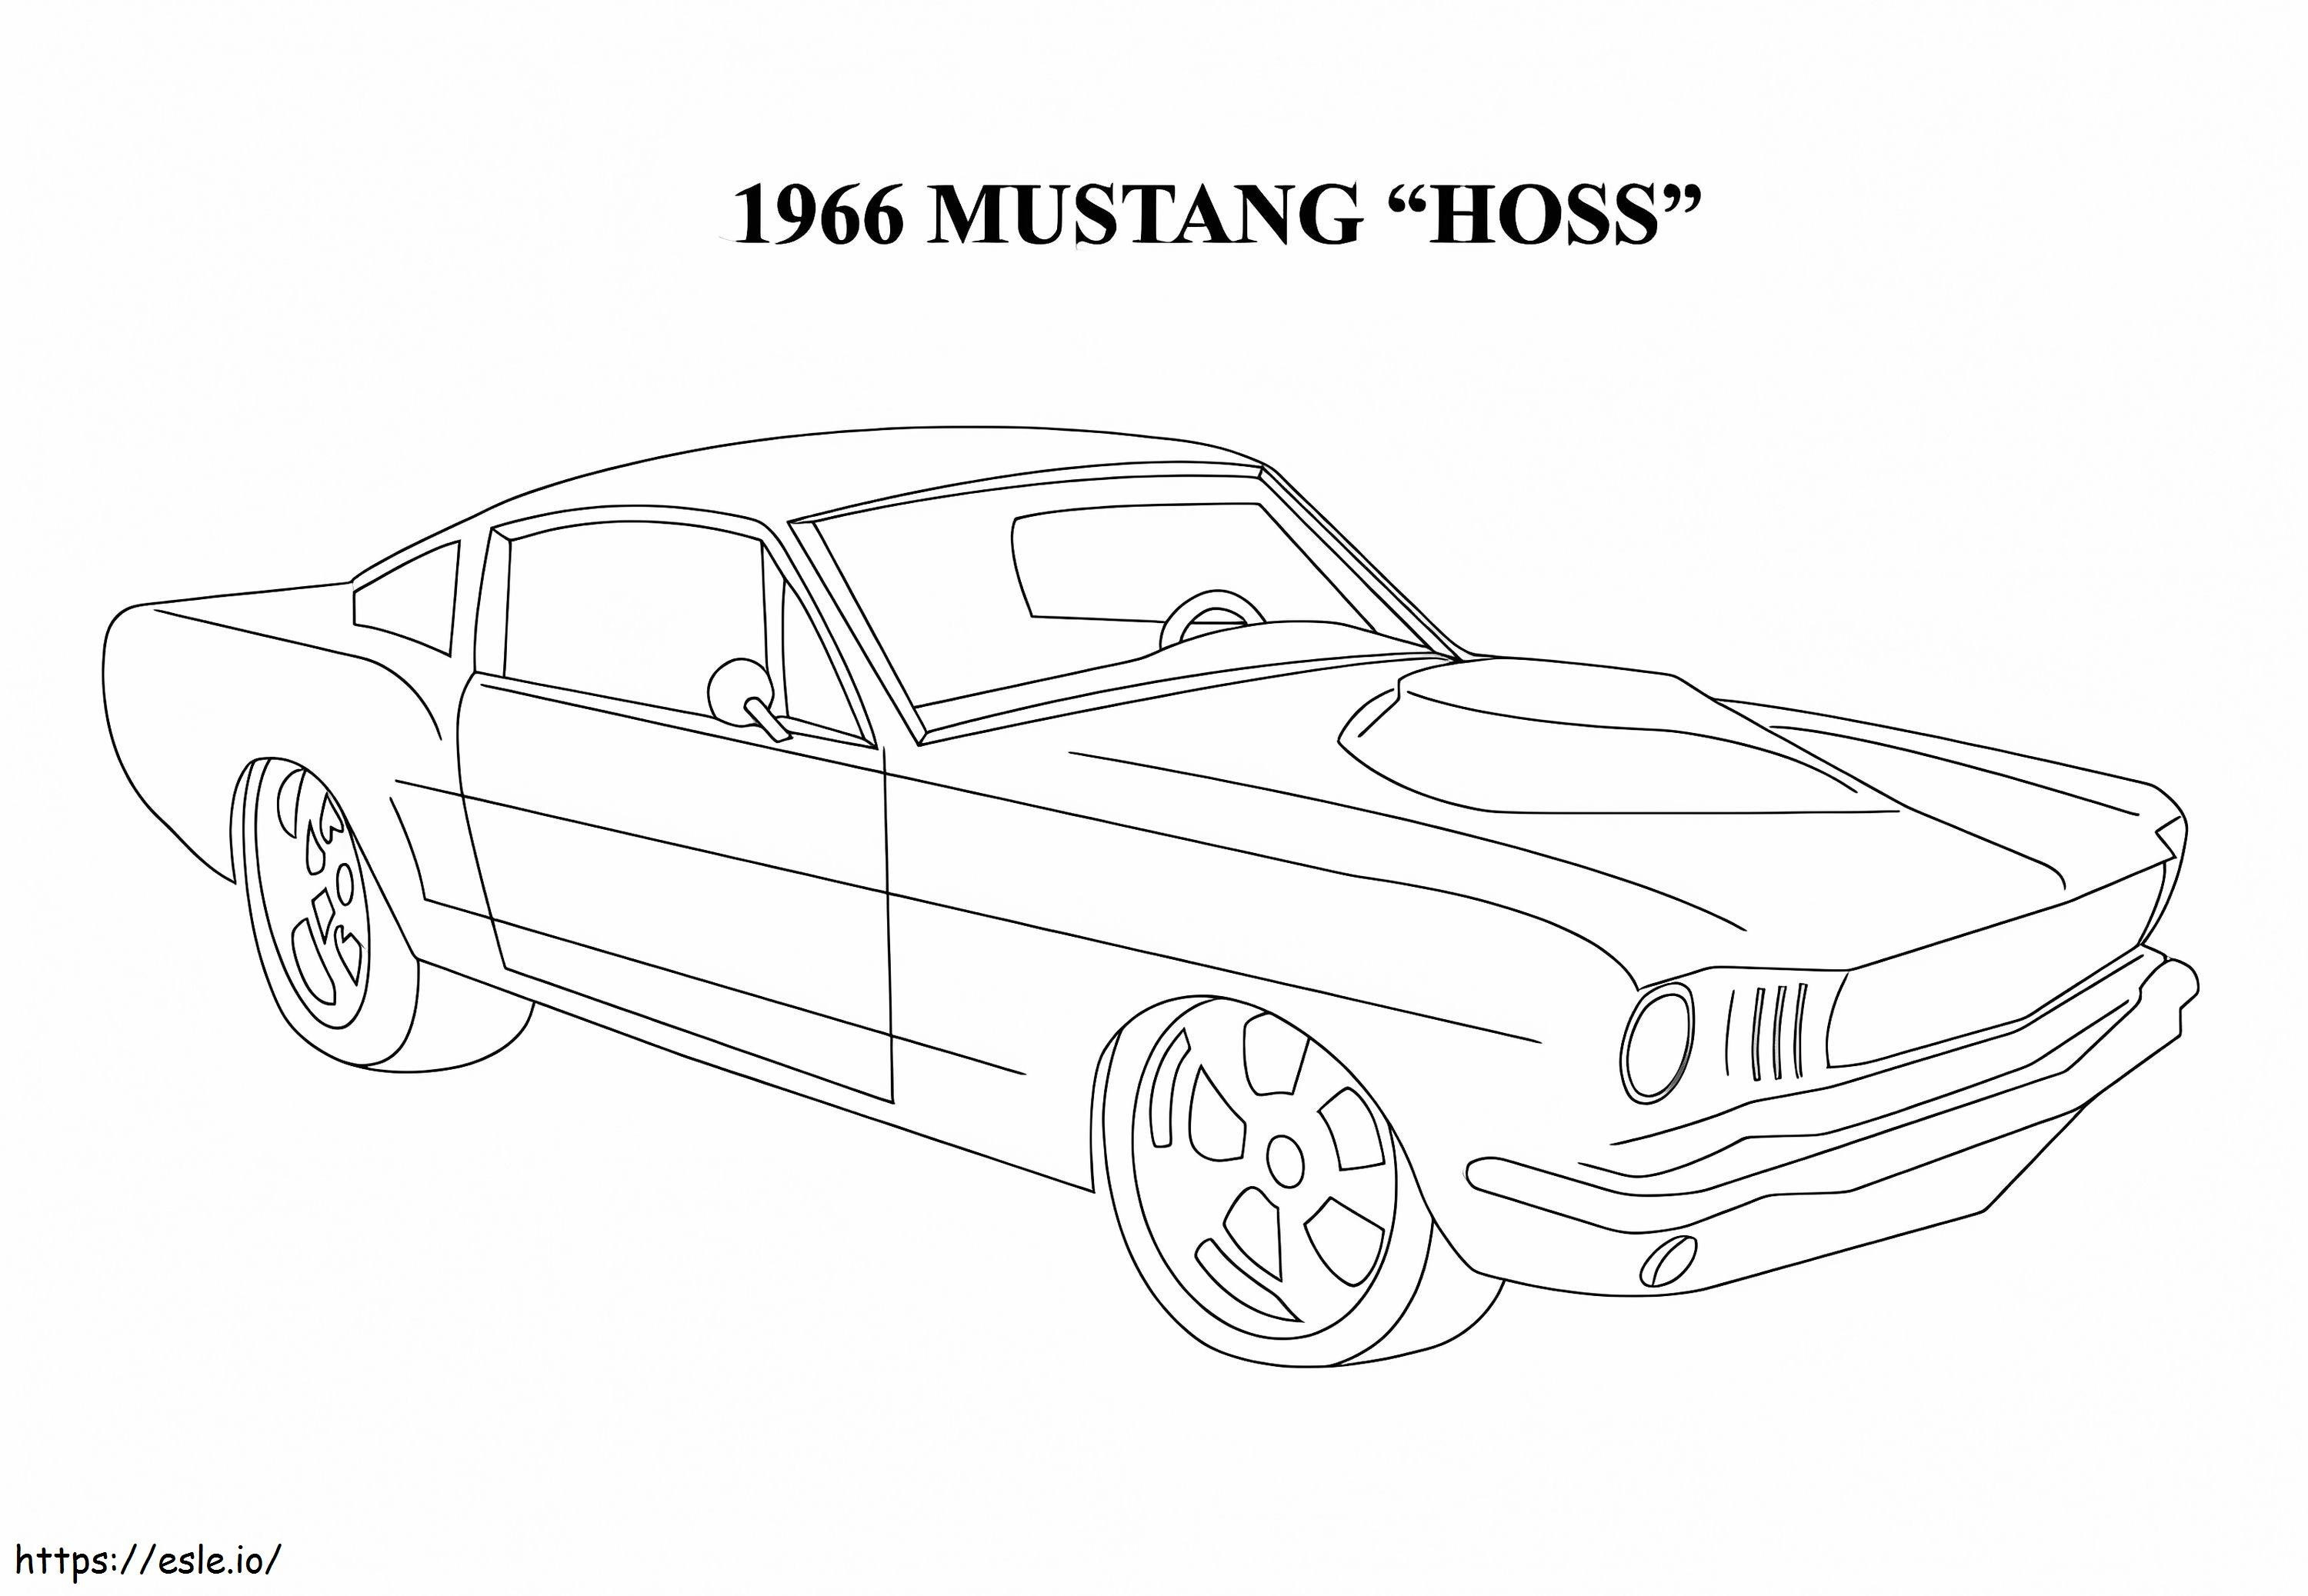 1965 Mustang coloring page